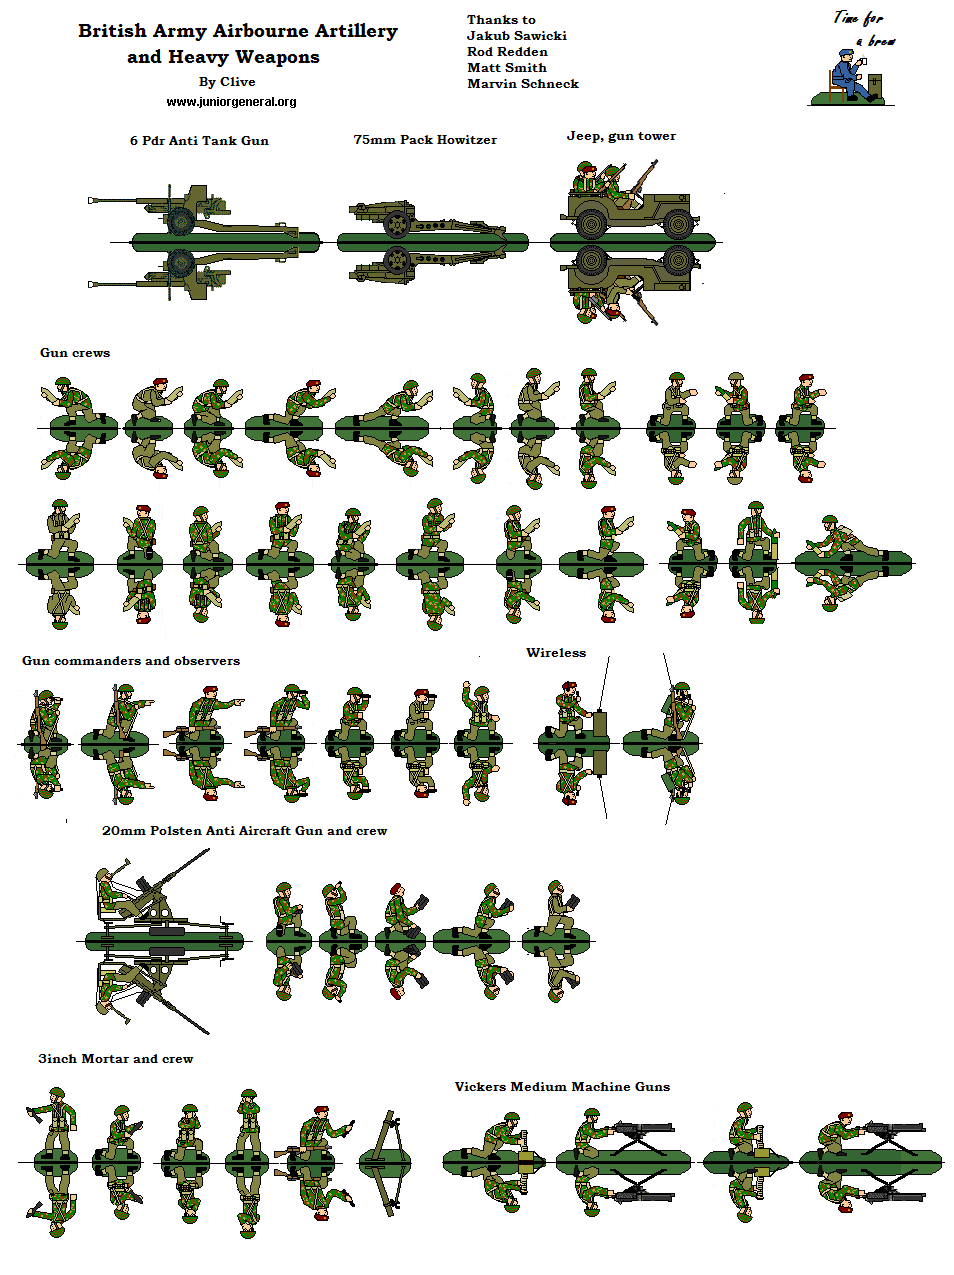 Airborne Artillery and Heavy Weapons